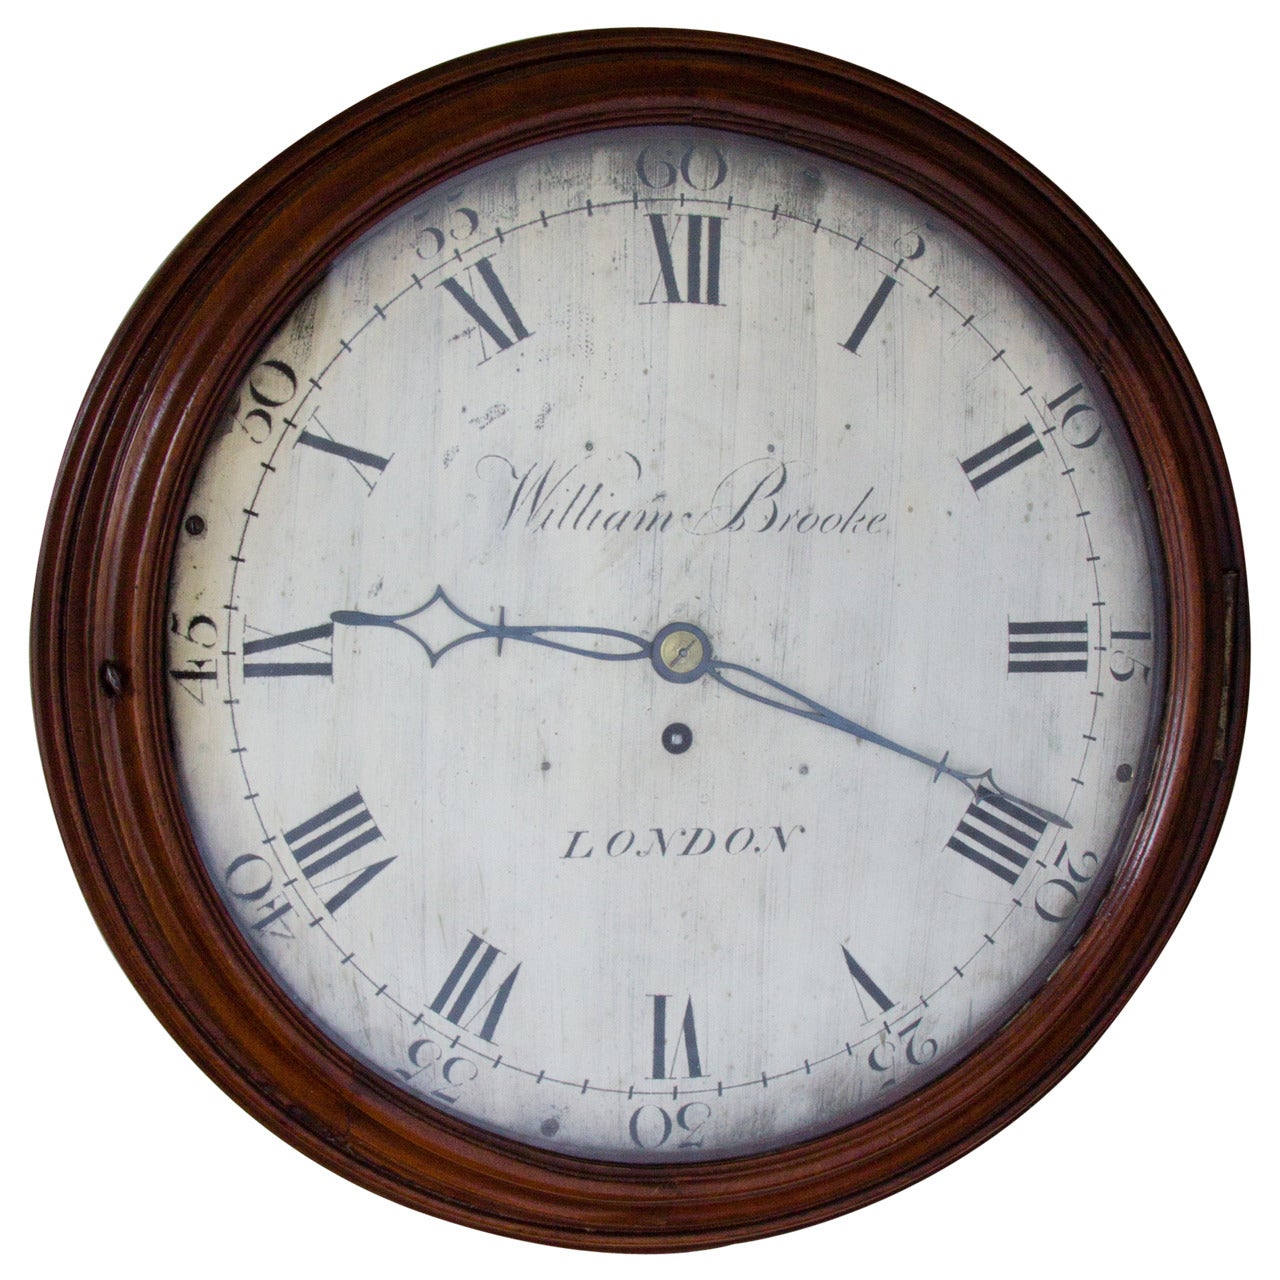 Brass Dial Fusee Wall Clock Signed, "William Brooke, London" For Sale